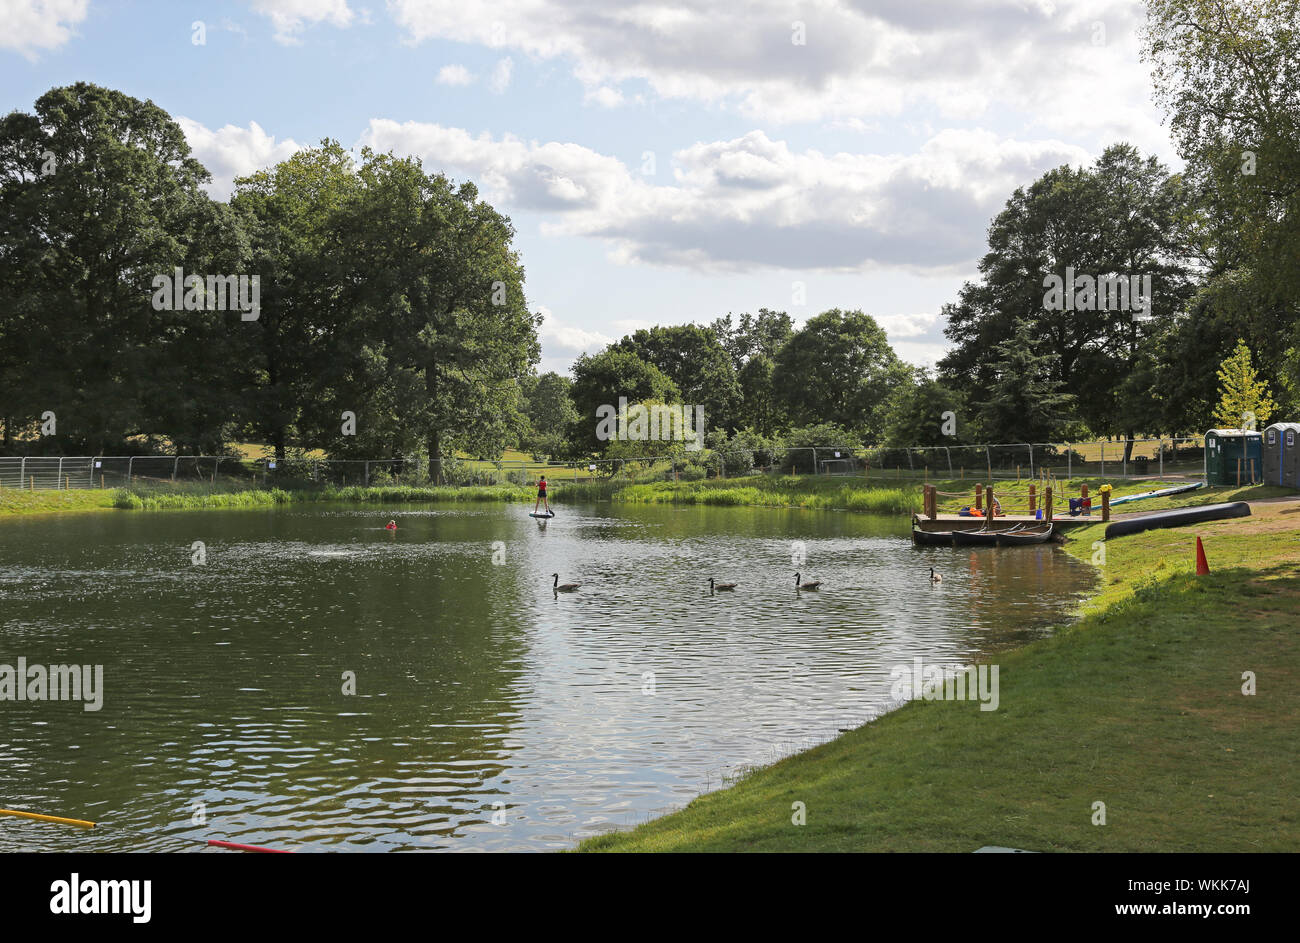 The new swimming lake at the recently remodelled Beckenham Place Park, southeast London, UK. Shows geese and customers with a hired paddleboard. Stock Photo